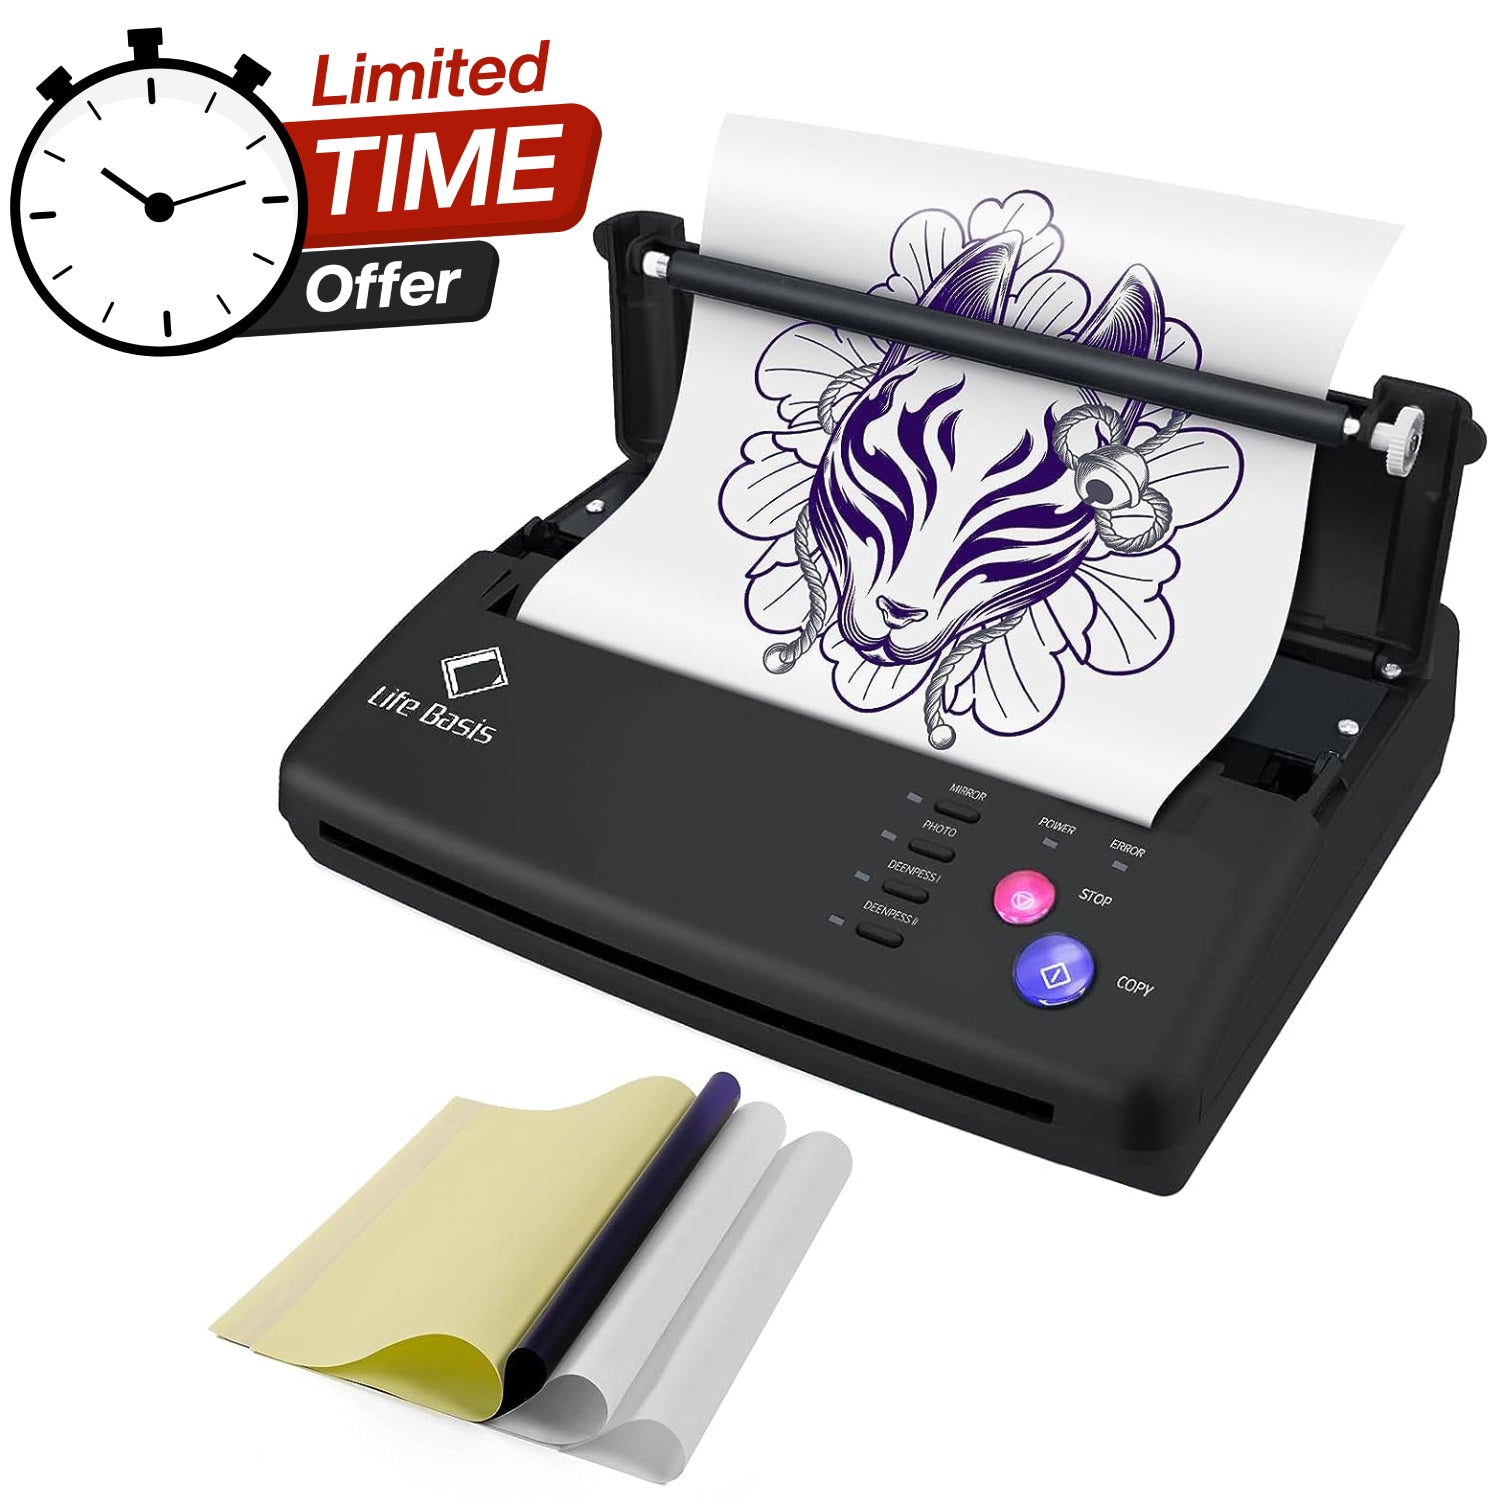 LifeBasis Tattoo Stencil Maker Transfer Machine Thermal Copier With Fr